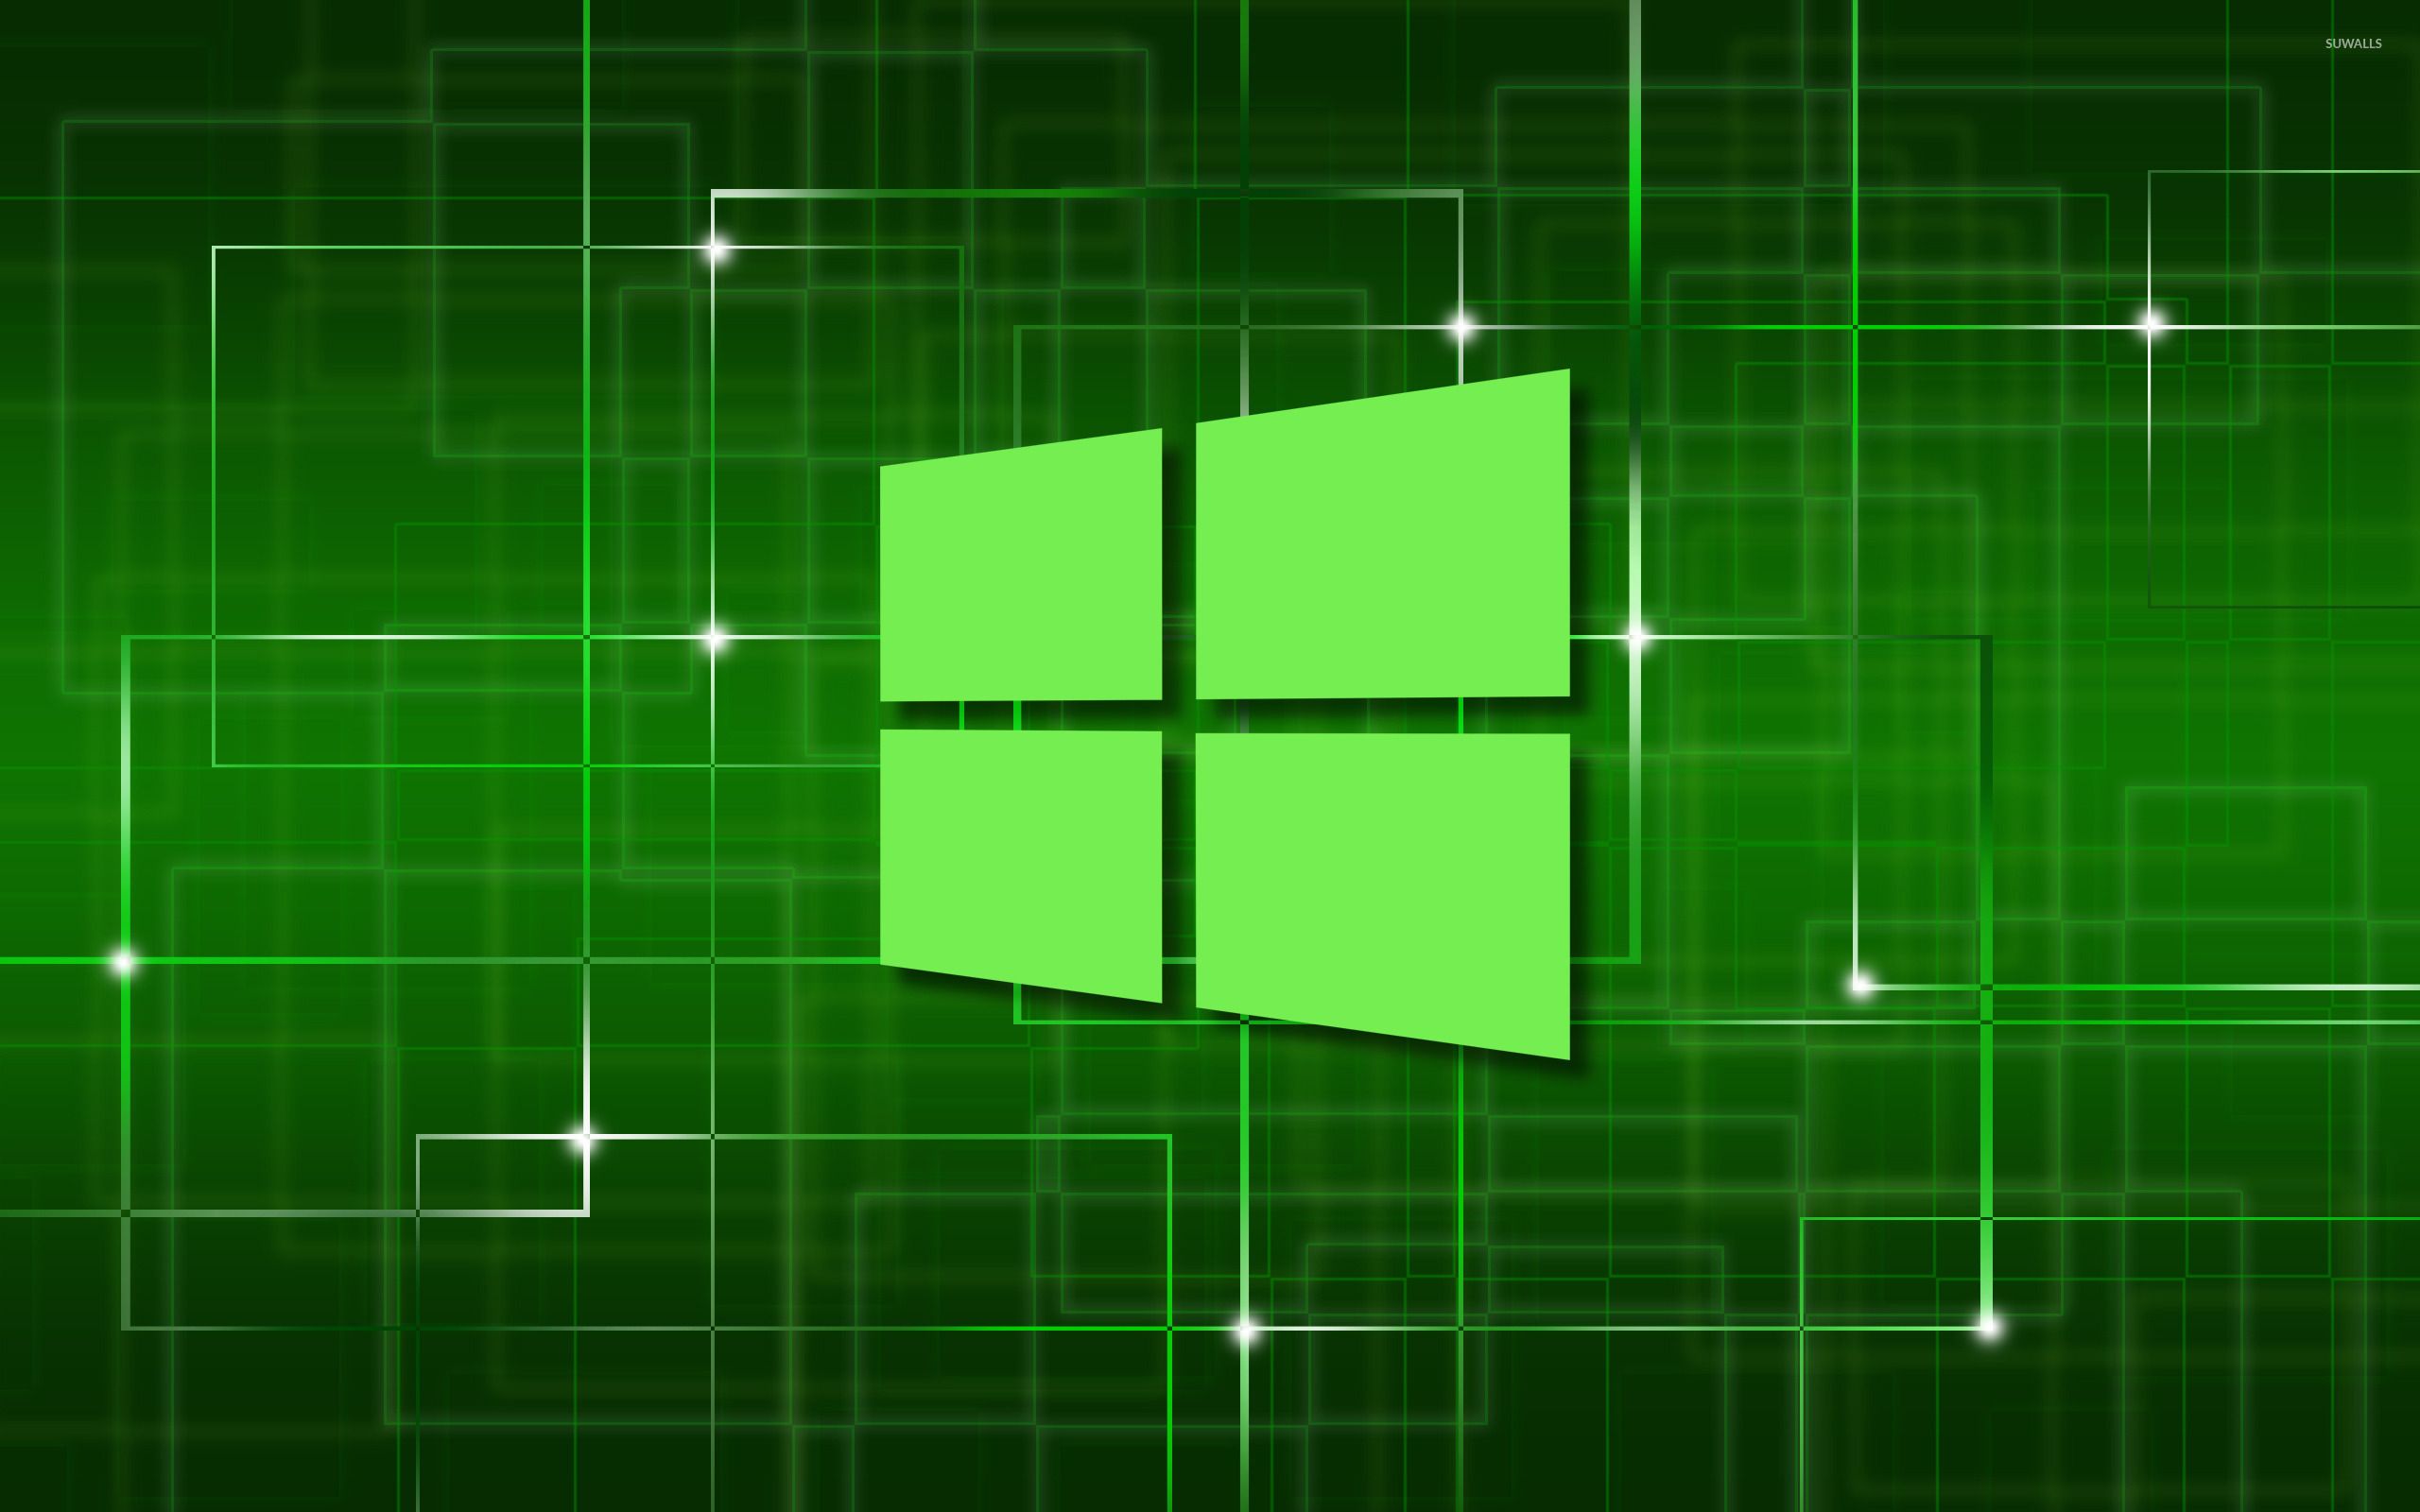 Green Windows 10 4K Wallpaper For Pc - Goimages This